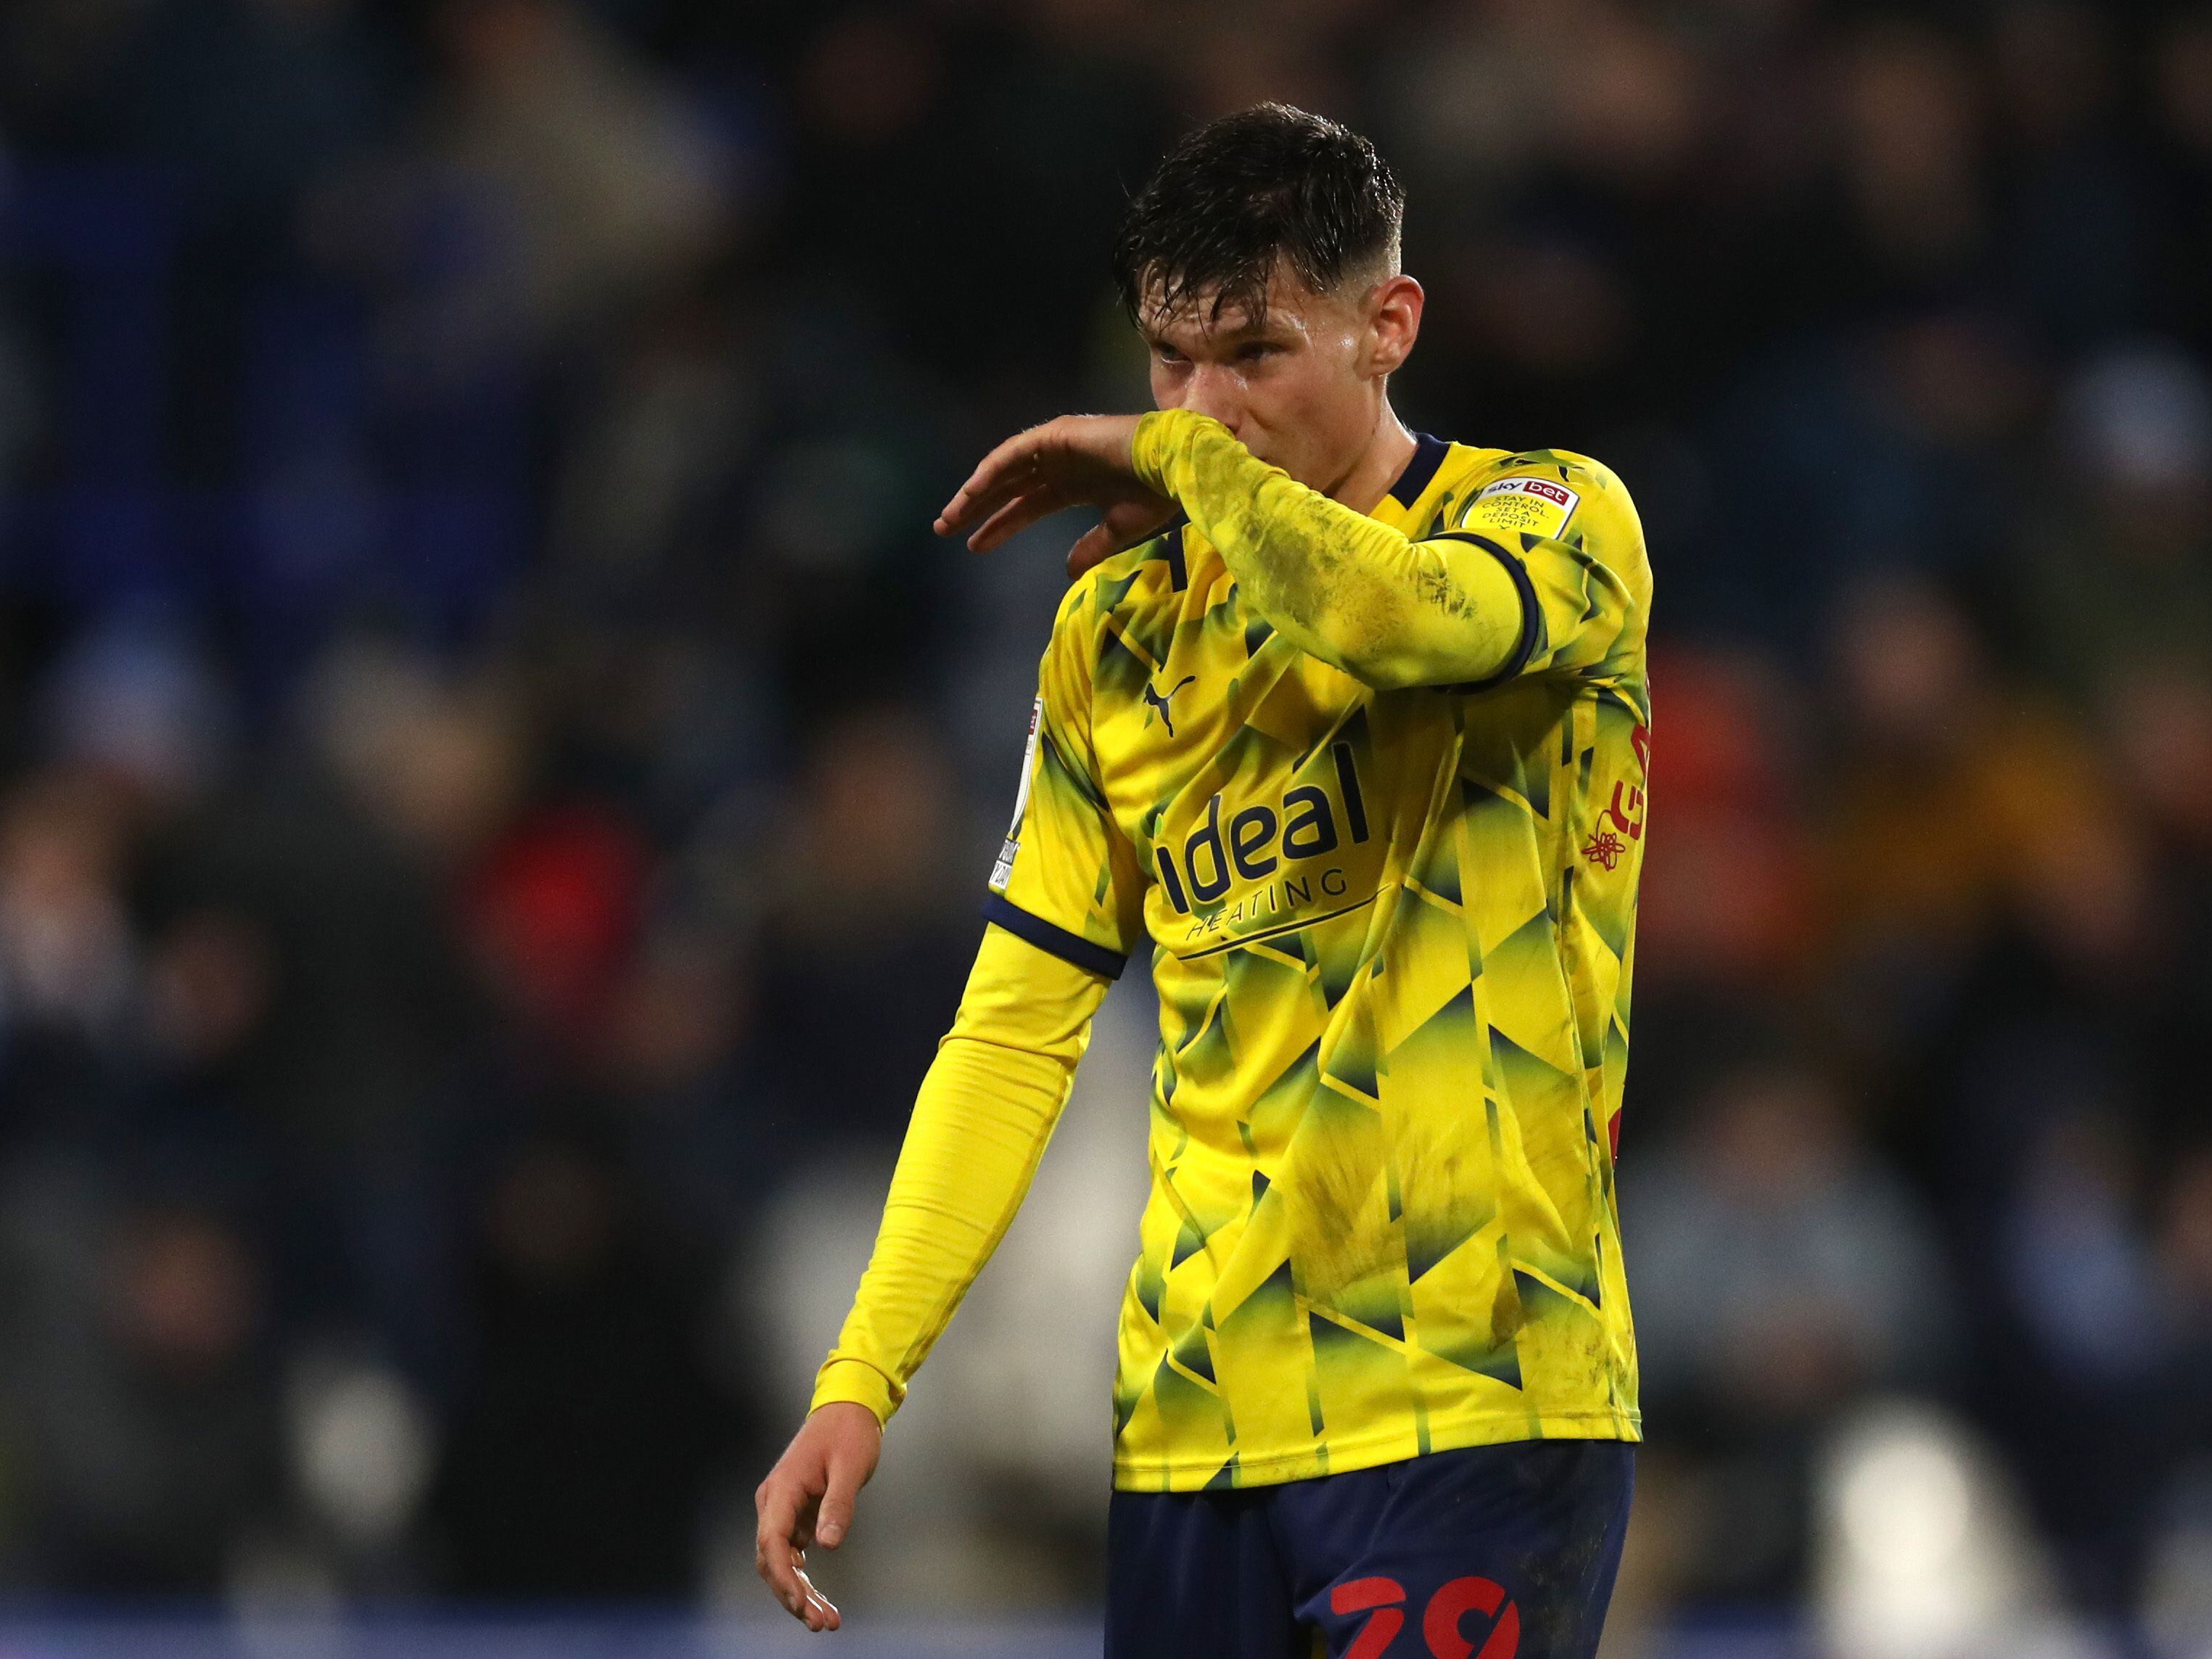 Taylor Gardner-Hickman was the perfect answer to West Brom poser